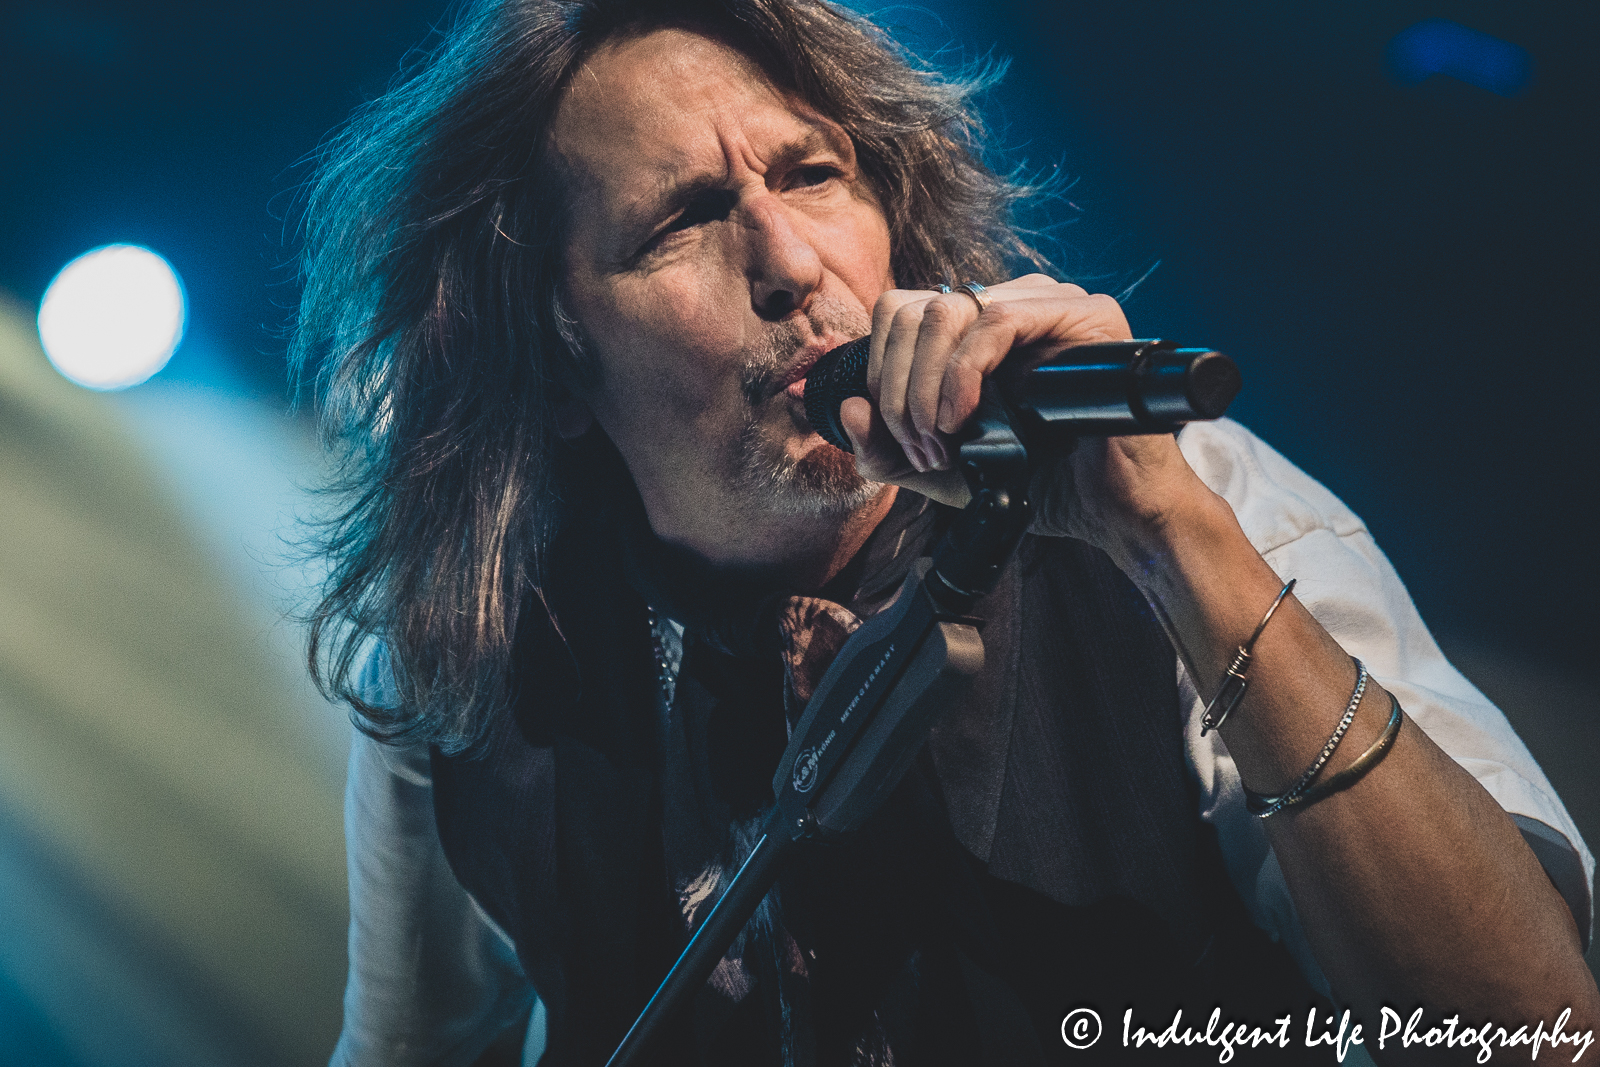 Foreigner lead vocalist Kelly Hansen singing "Cold as Ice" live at Landon Arena inside of Stormont Vail Events Center in Topeka, KS on May 2, 2023.